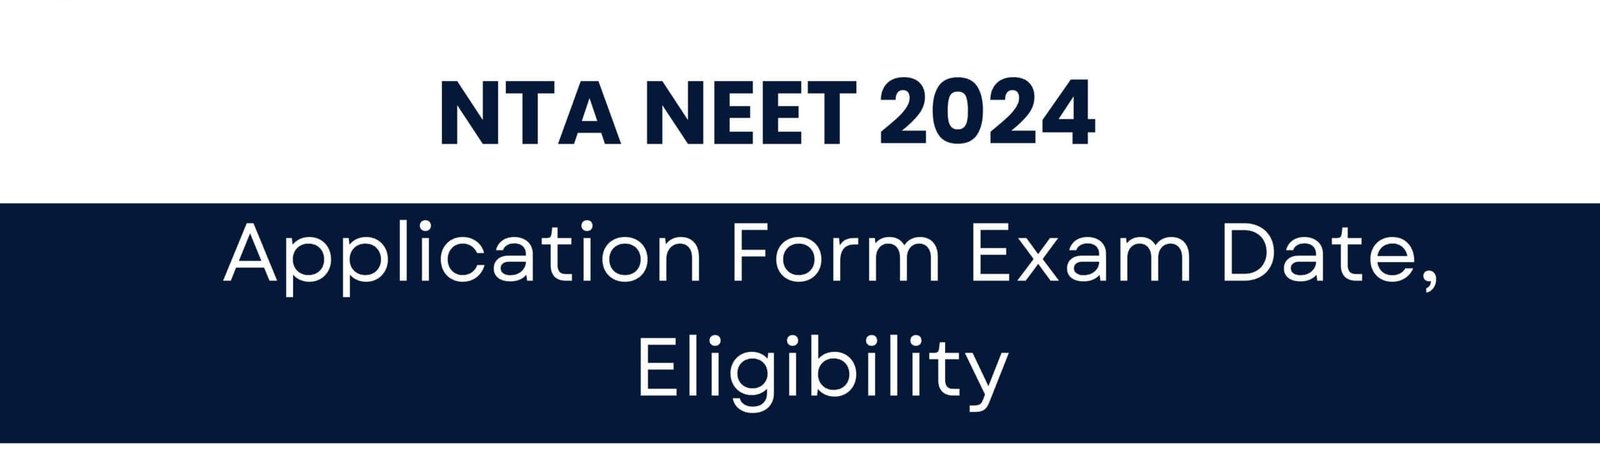 NTA NEET 2024 Application Form Exam Date, Eligibility, Fee and More